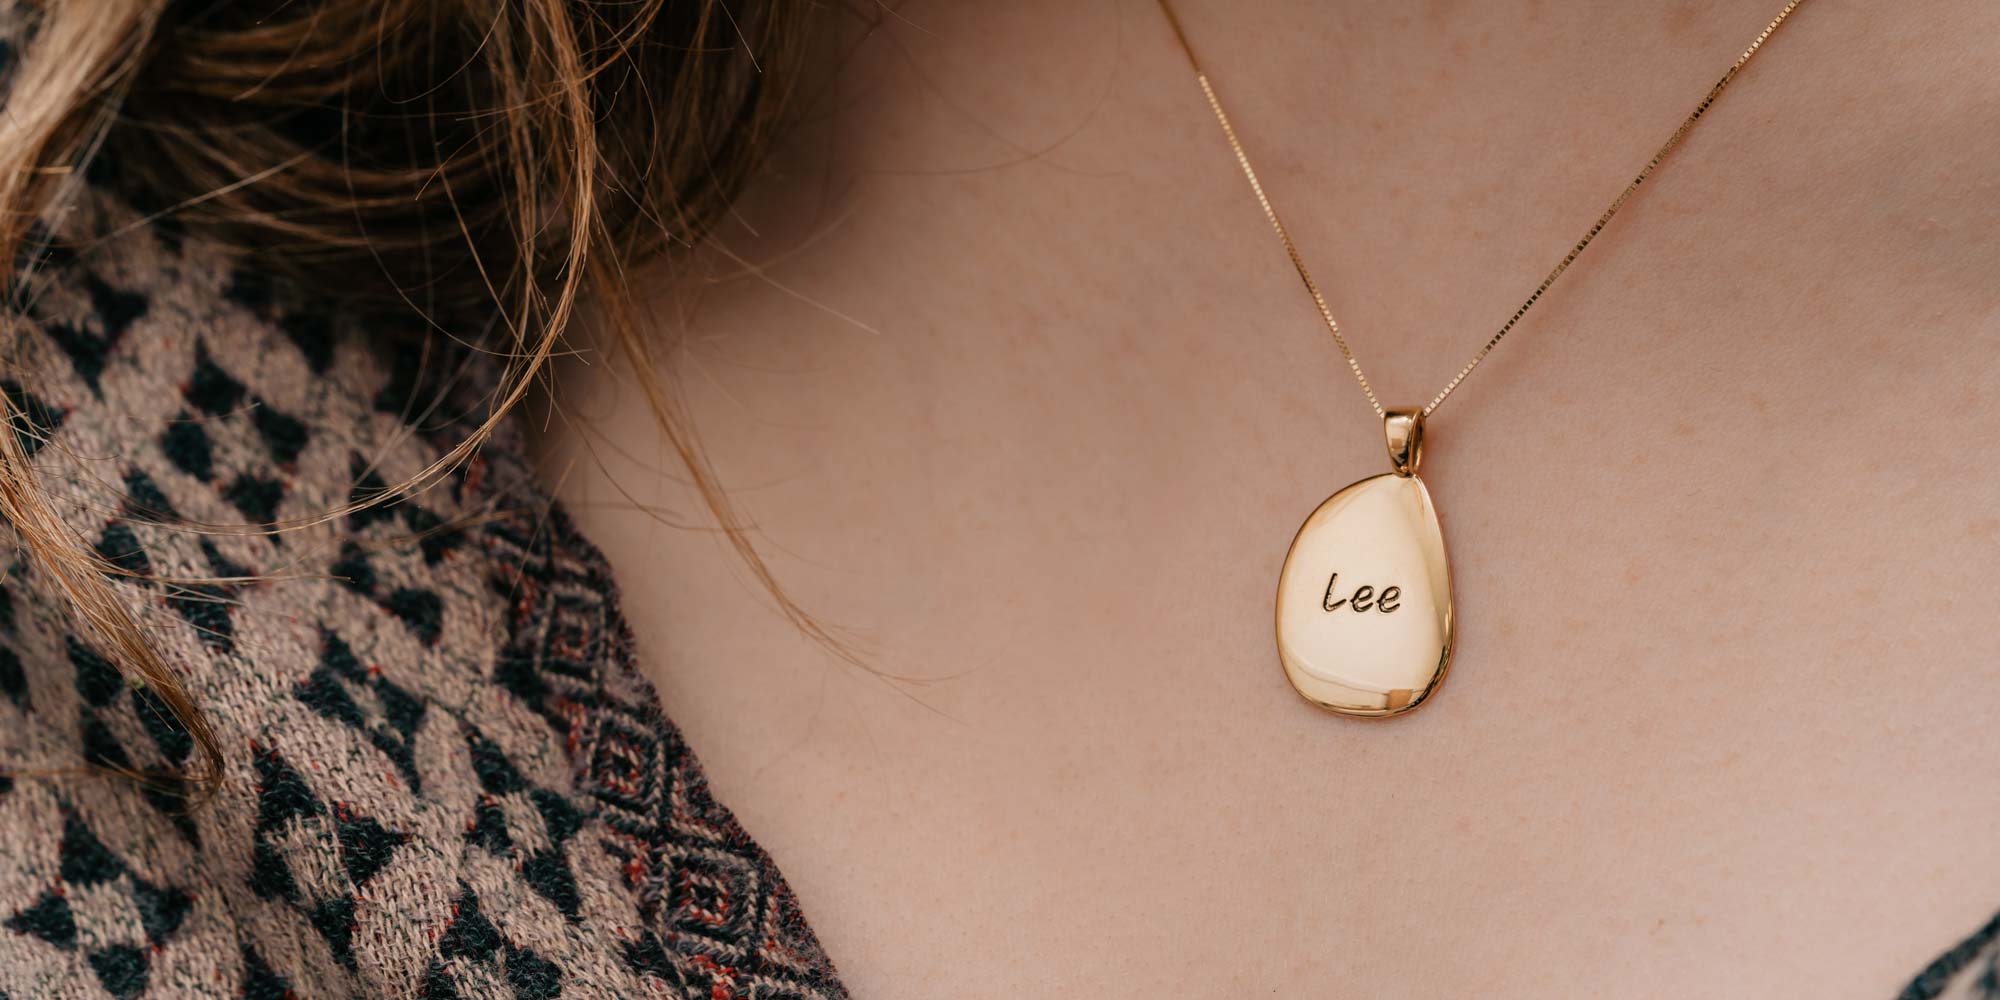 Gold pebble necklace engraved with 'Lee' worn on models neck.